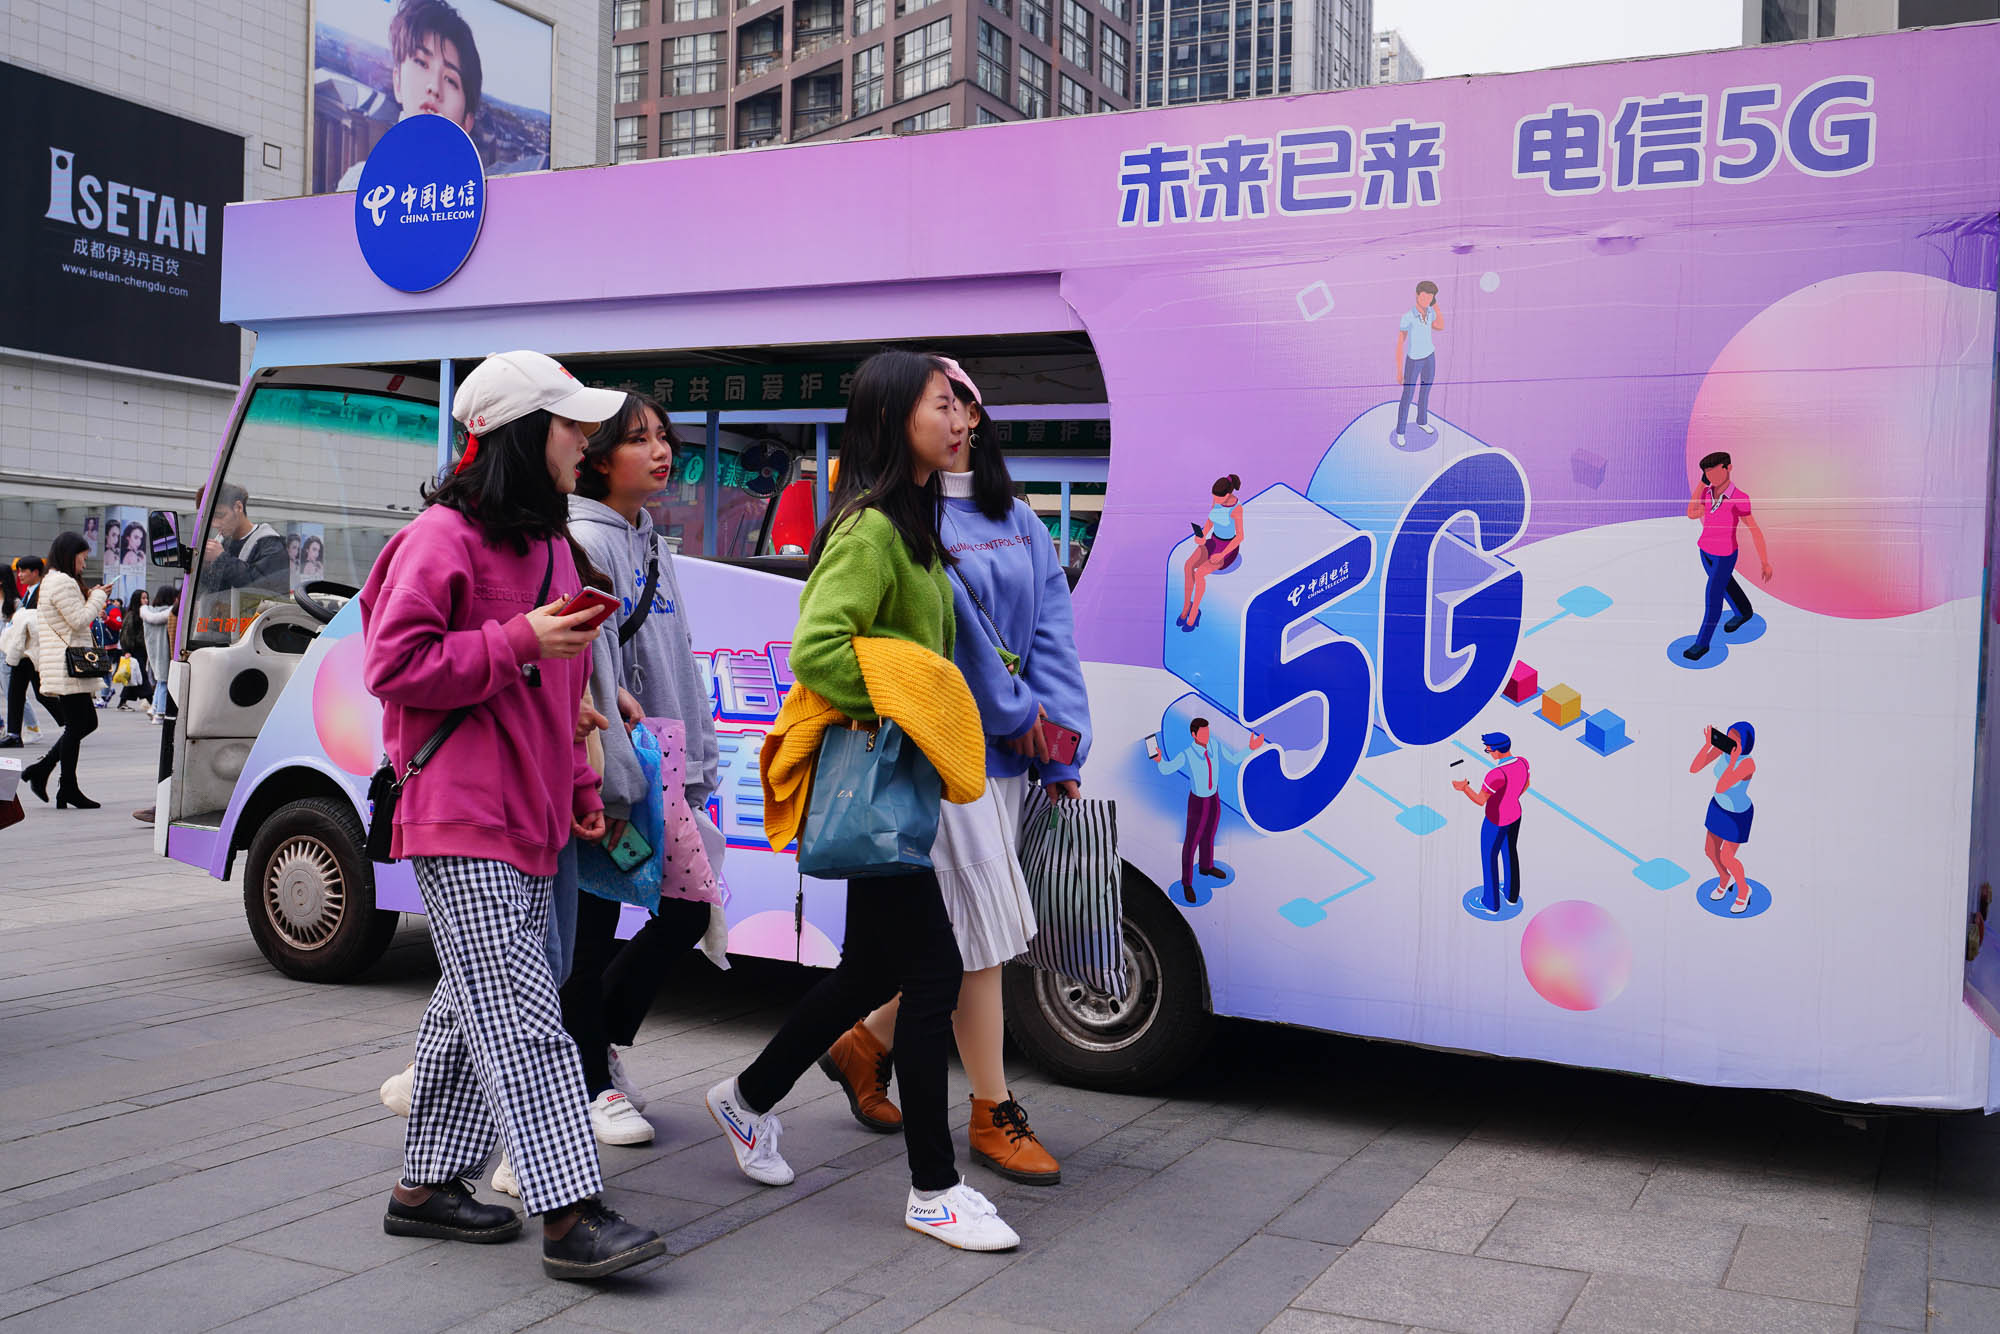 A 5G testing spot is provided by a Chinese telecoms company in Chengdu downtown. China has invested significantly in 5G infrastructure development. Editorial Credit: Editorial credit: B.Zhou / Shutterstock.com.